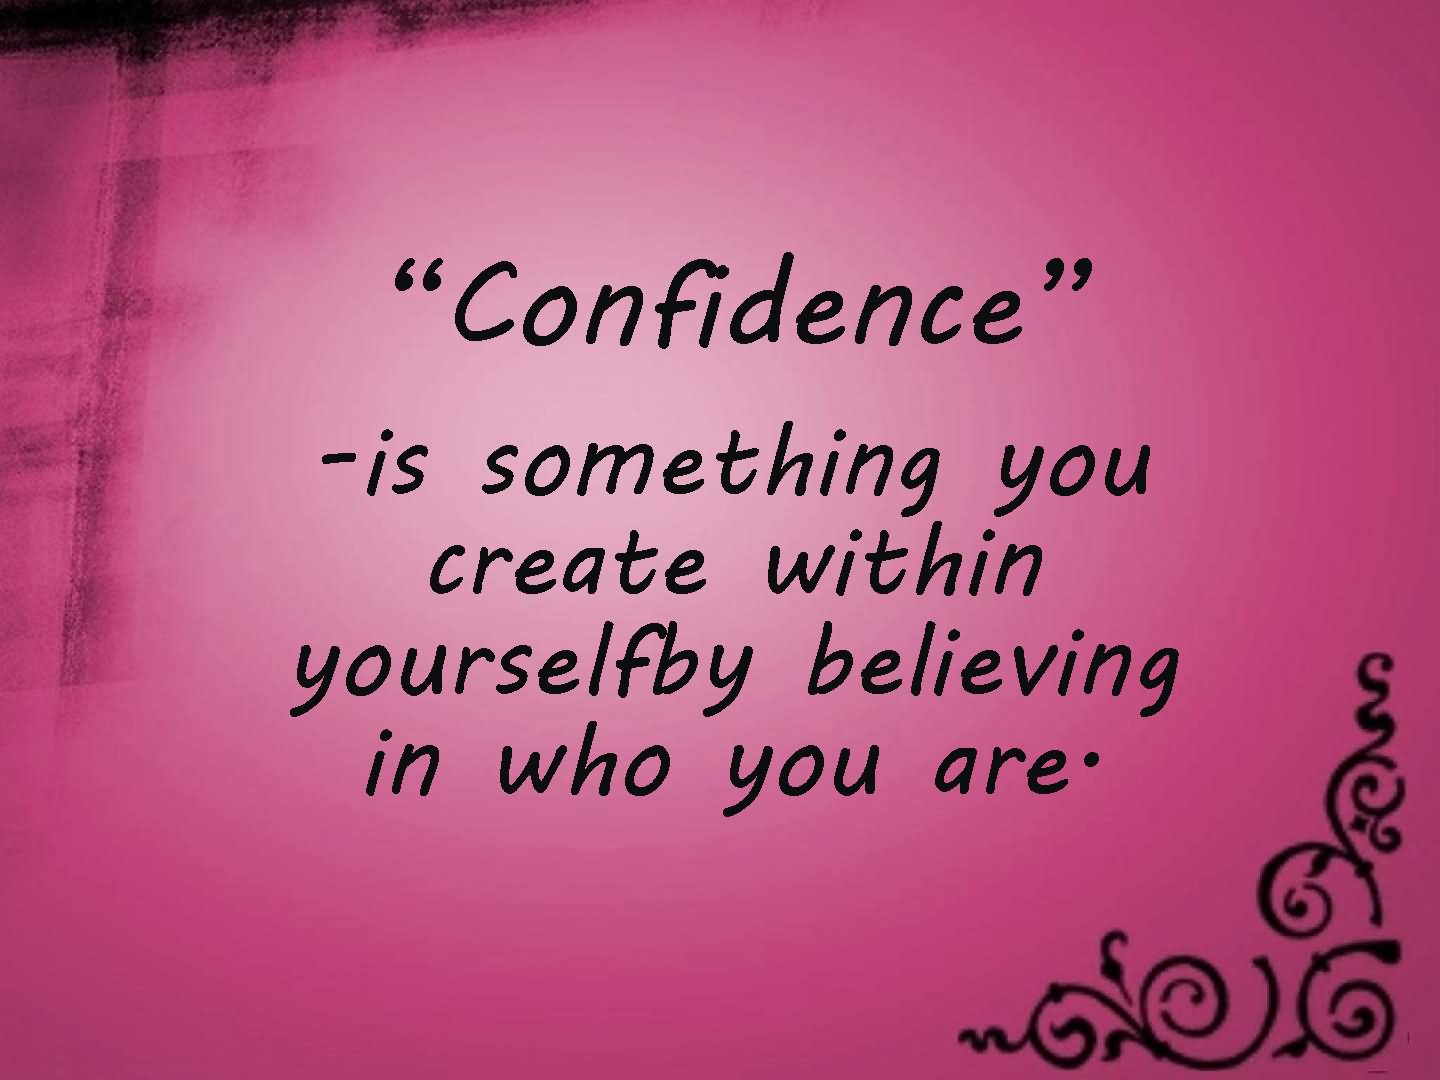 Confidence Is Something You Create Within Yourself Believing In Who You Are.